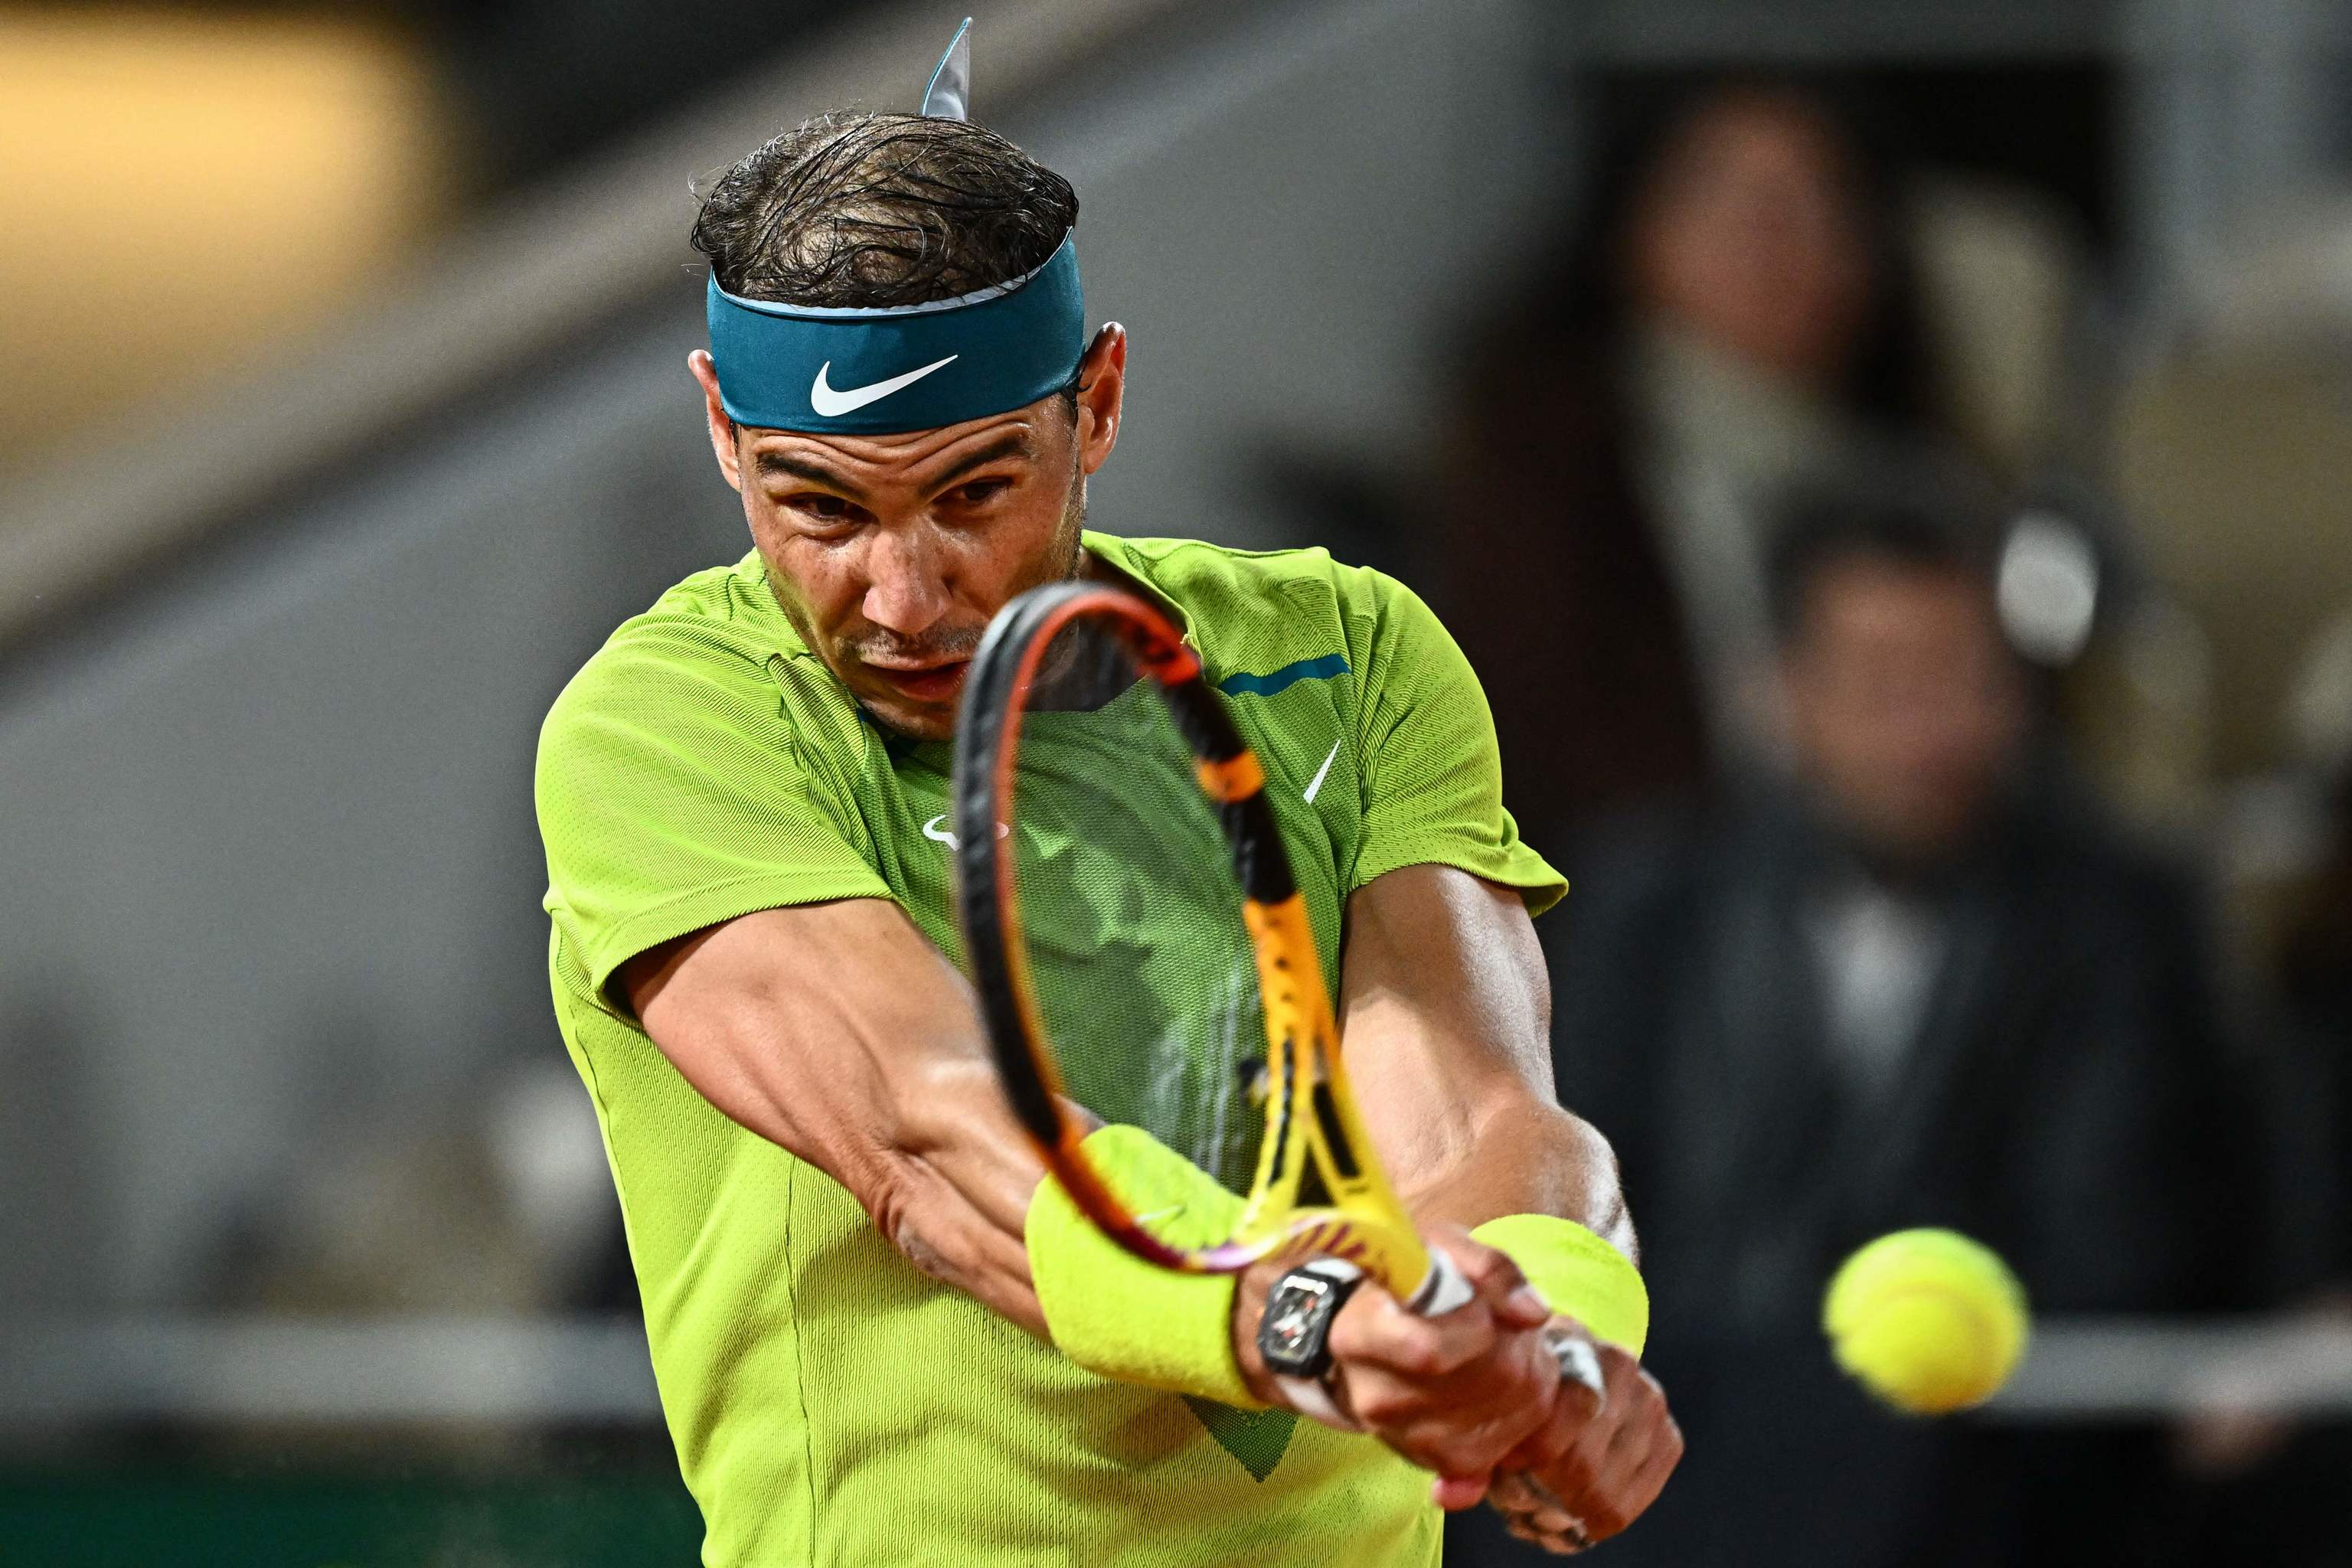 Nadal defeated Moutet.